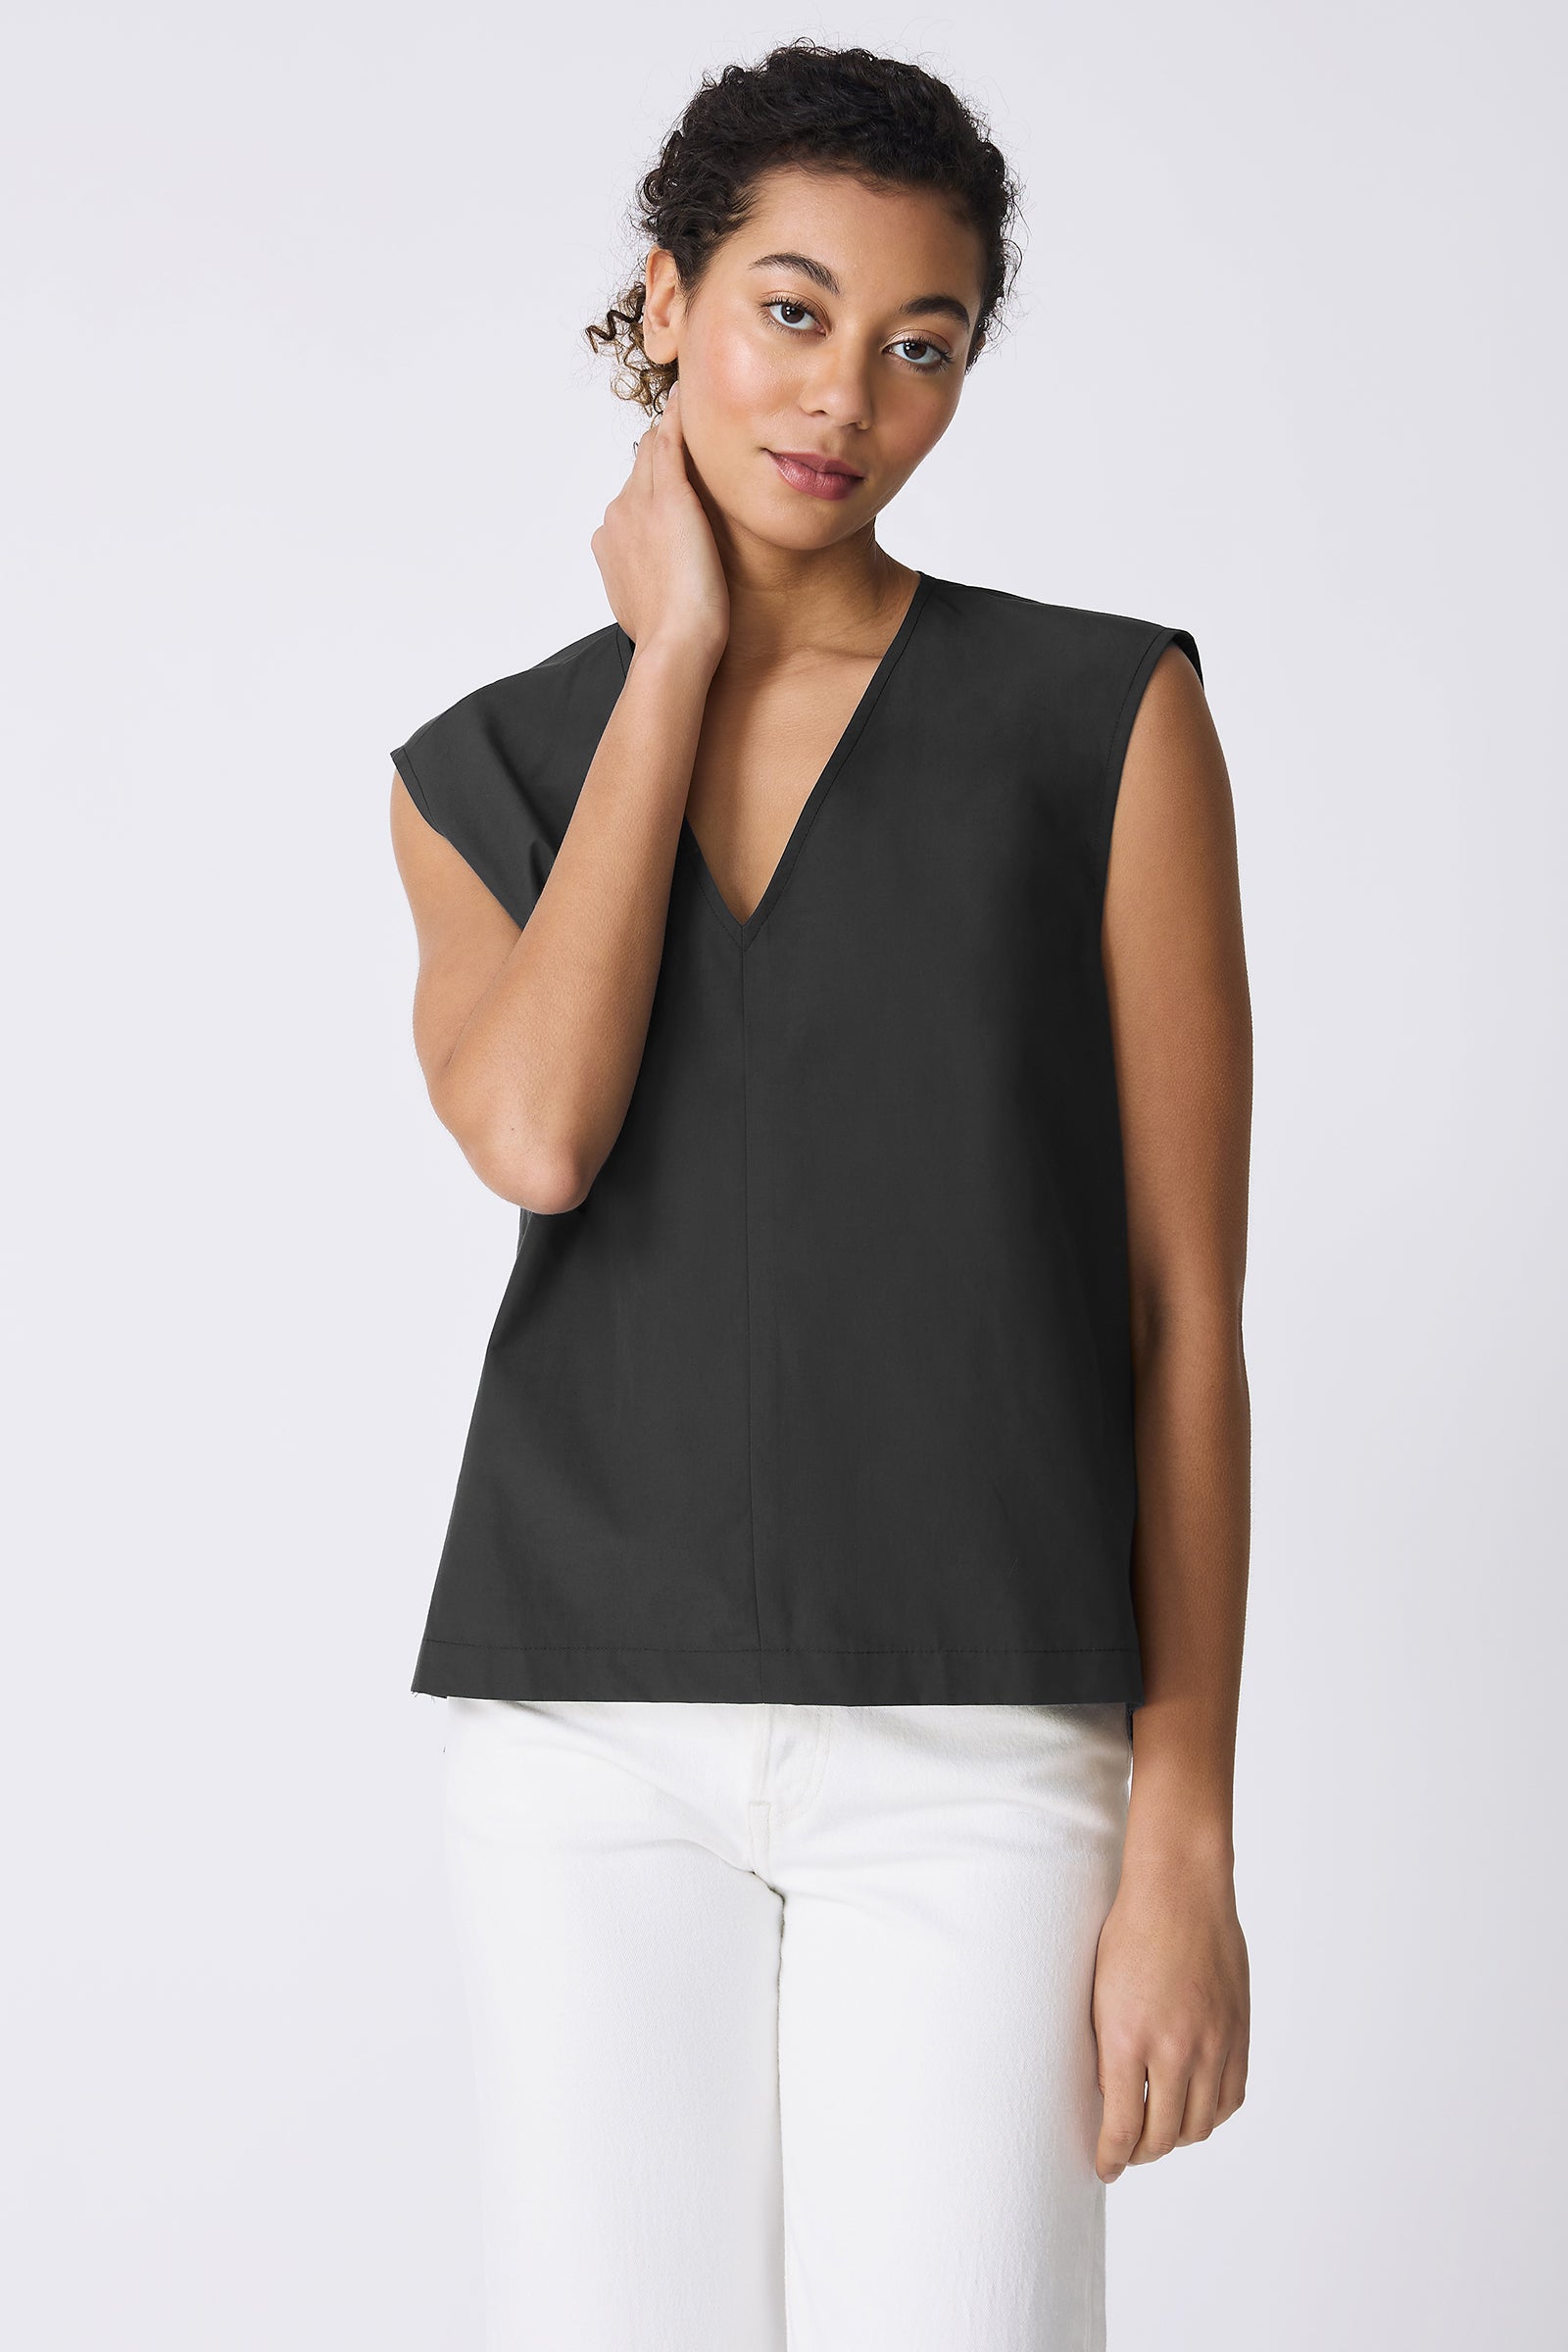 Kal Rieman Ava V-Neck Shell in Black on model touching neck front view